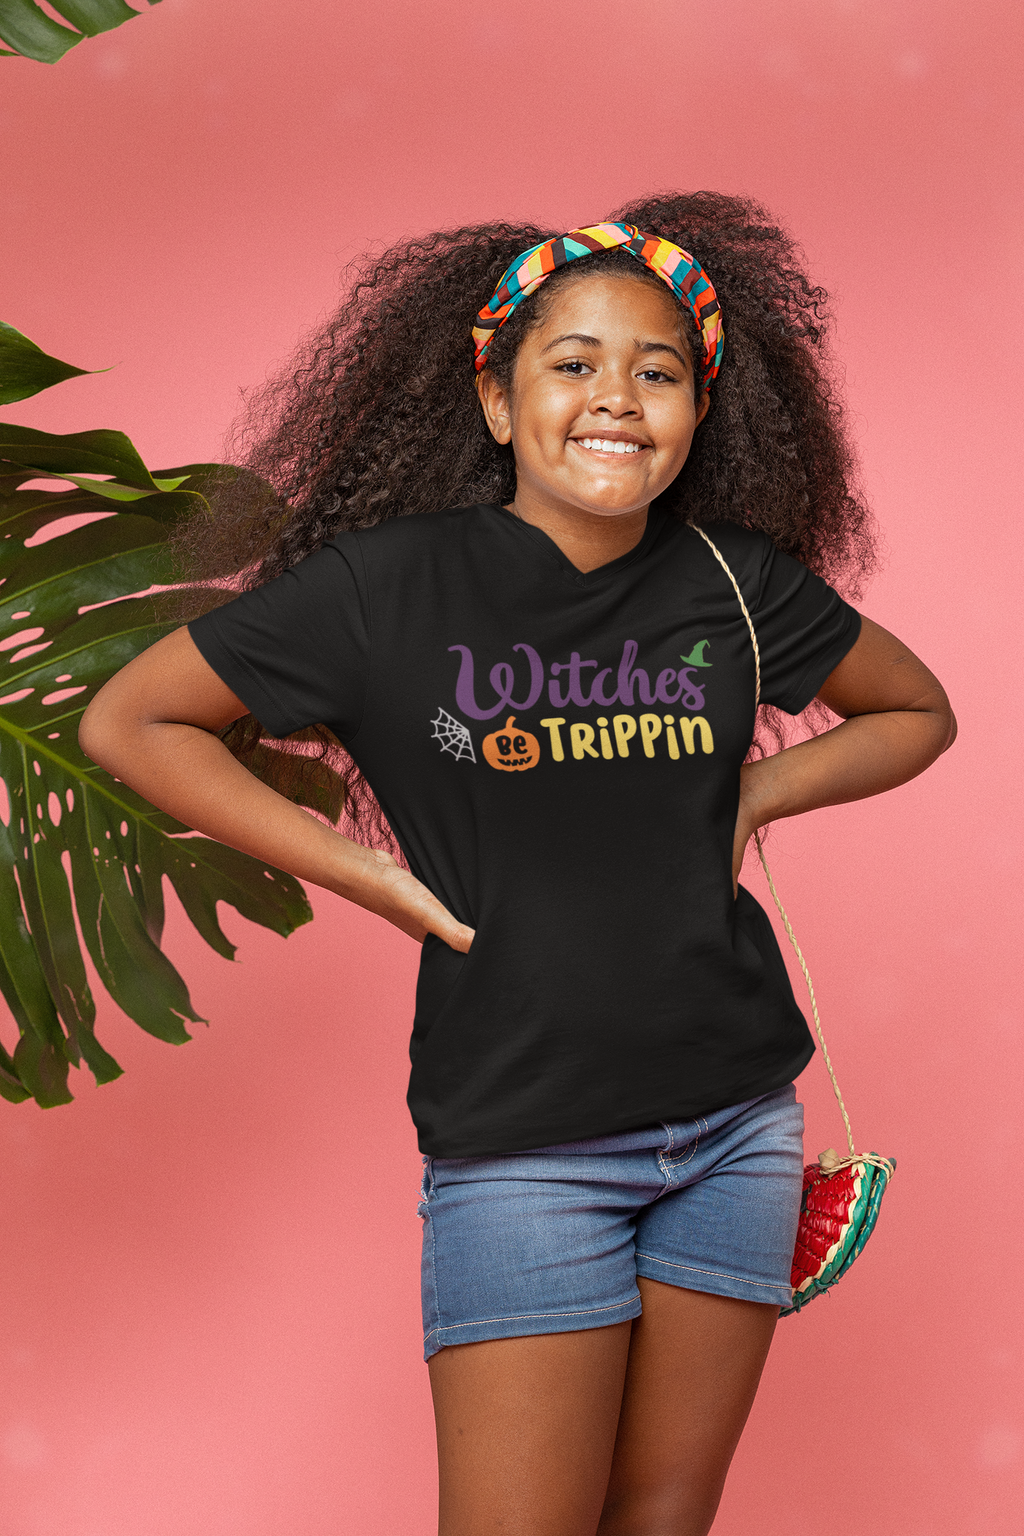 "Witches Be Trippin" - T-Shirt (Toddlers)